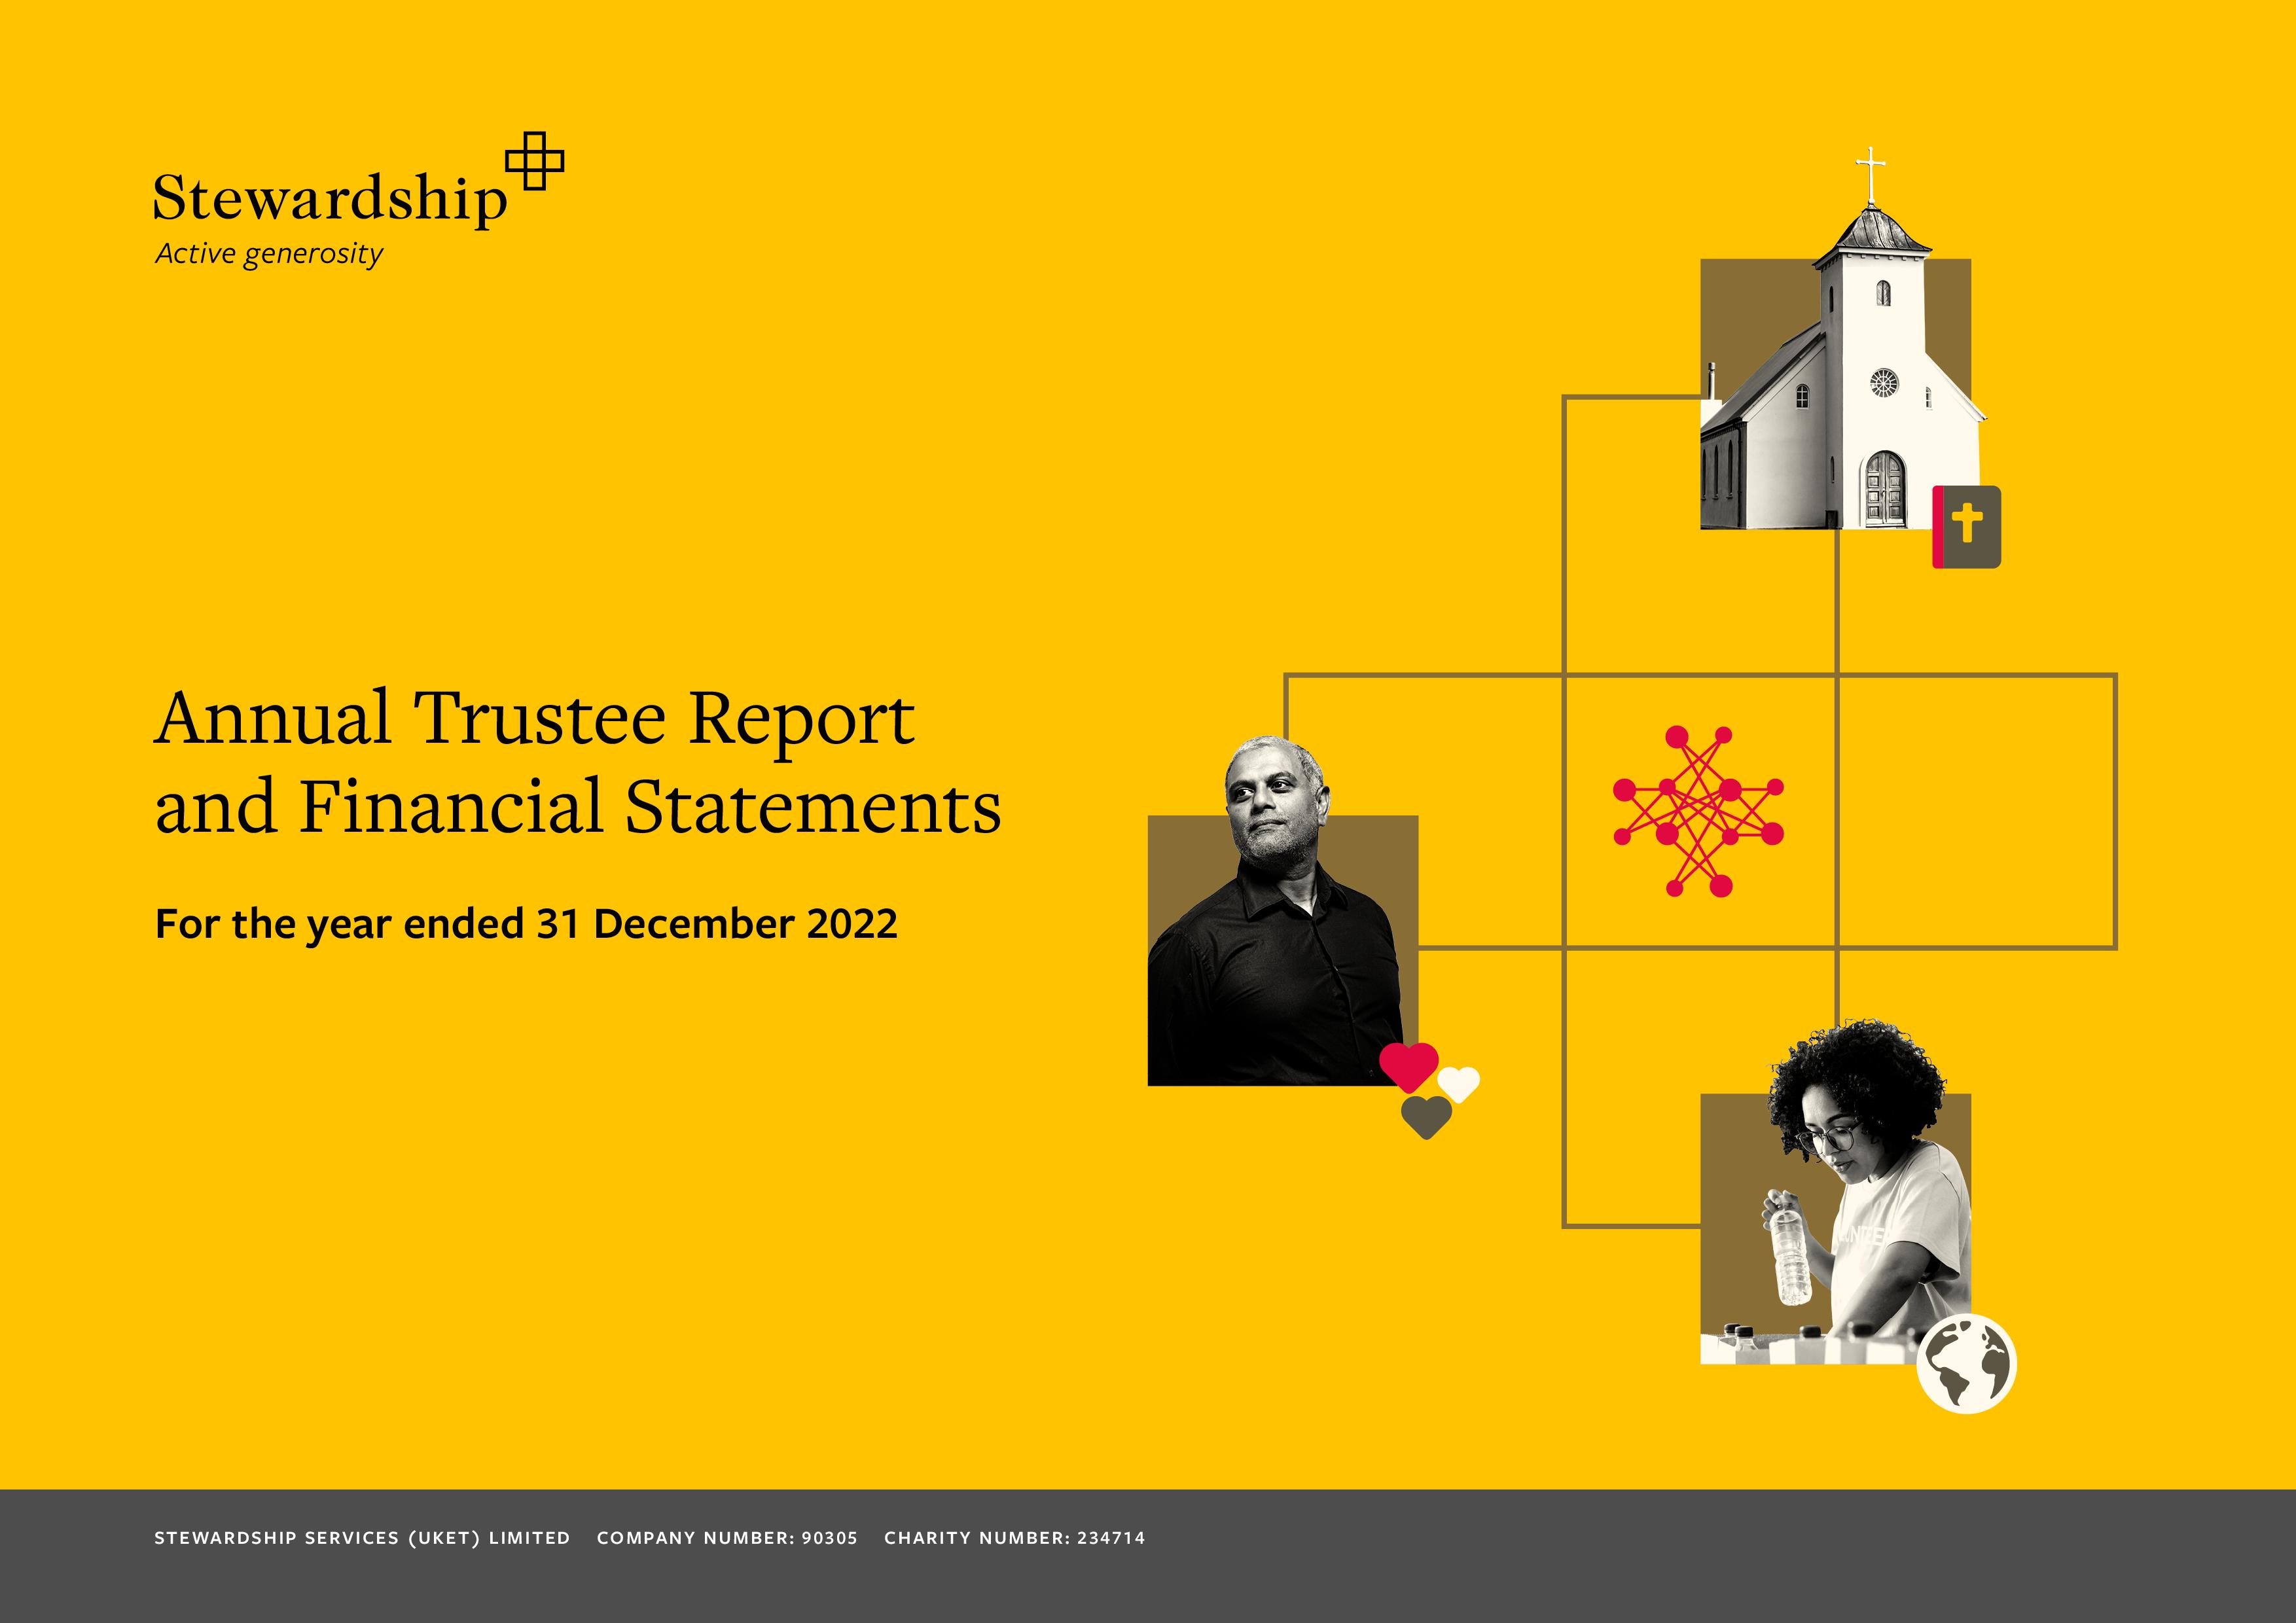 Cover image of Stewardship's Annual Trustee Report for the year ended 31 December 2022